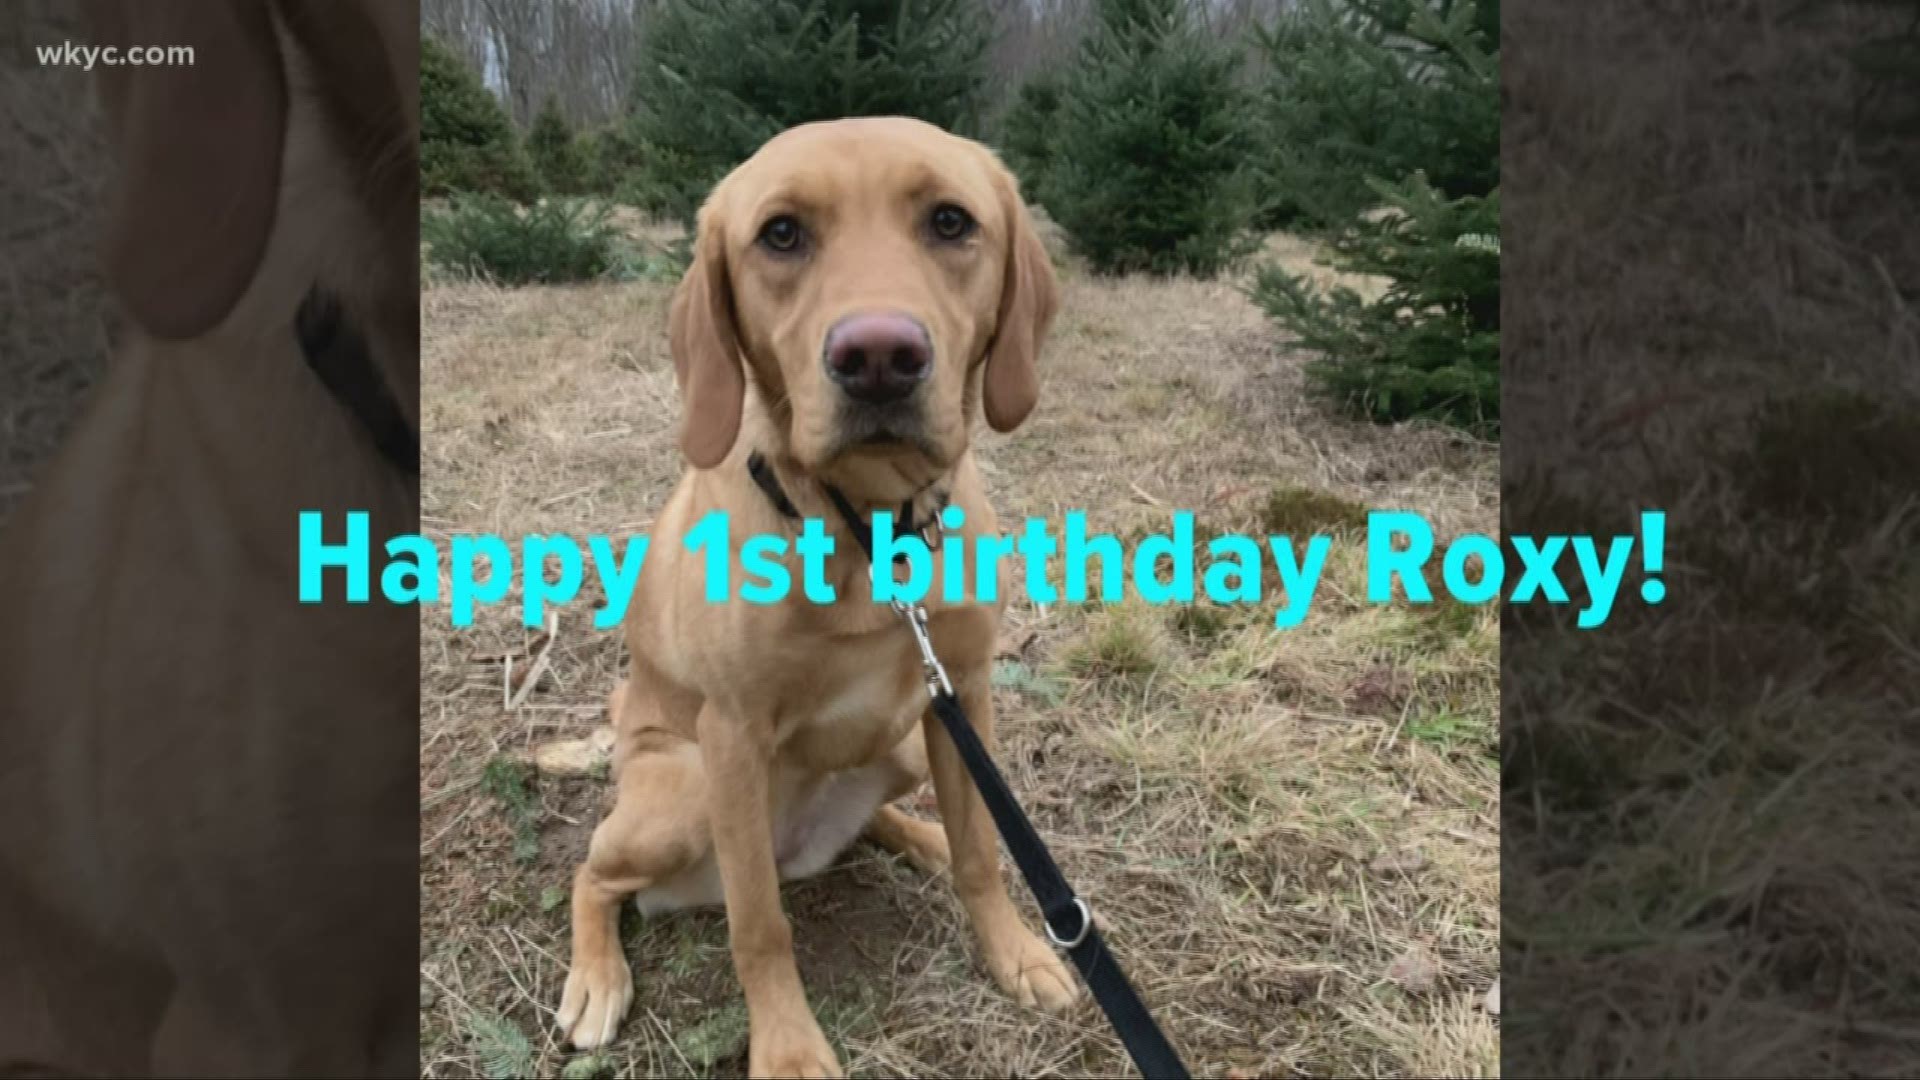 Roxy, our Wags4Warriors dog, turns 1 year old Dec. 16. Take a look back at her first year of life.